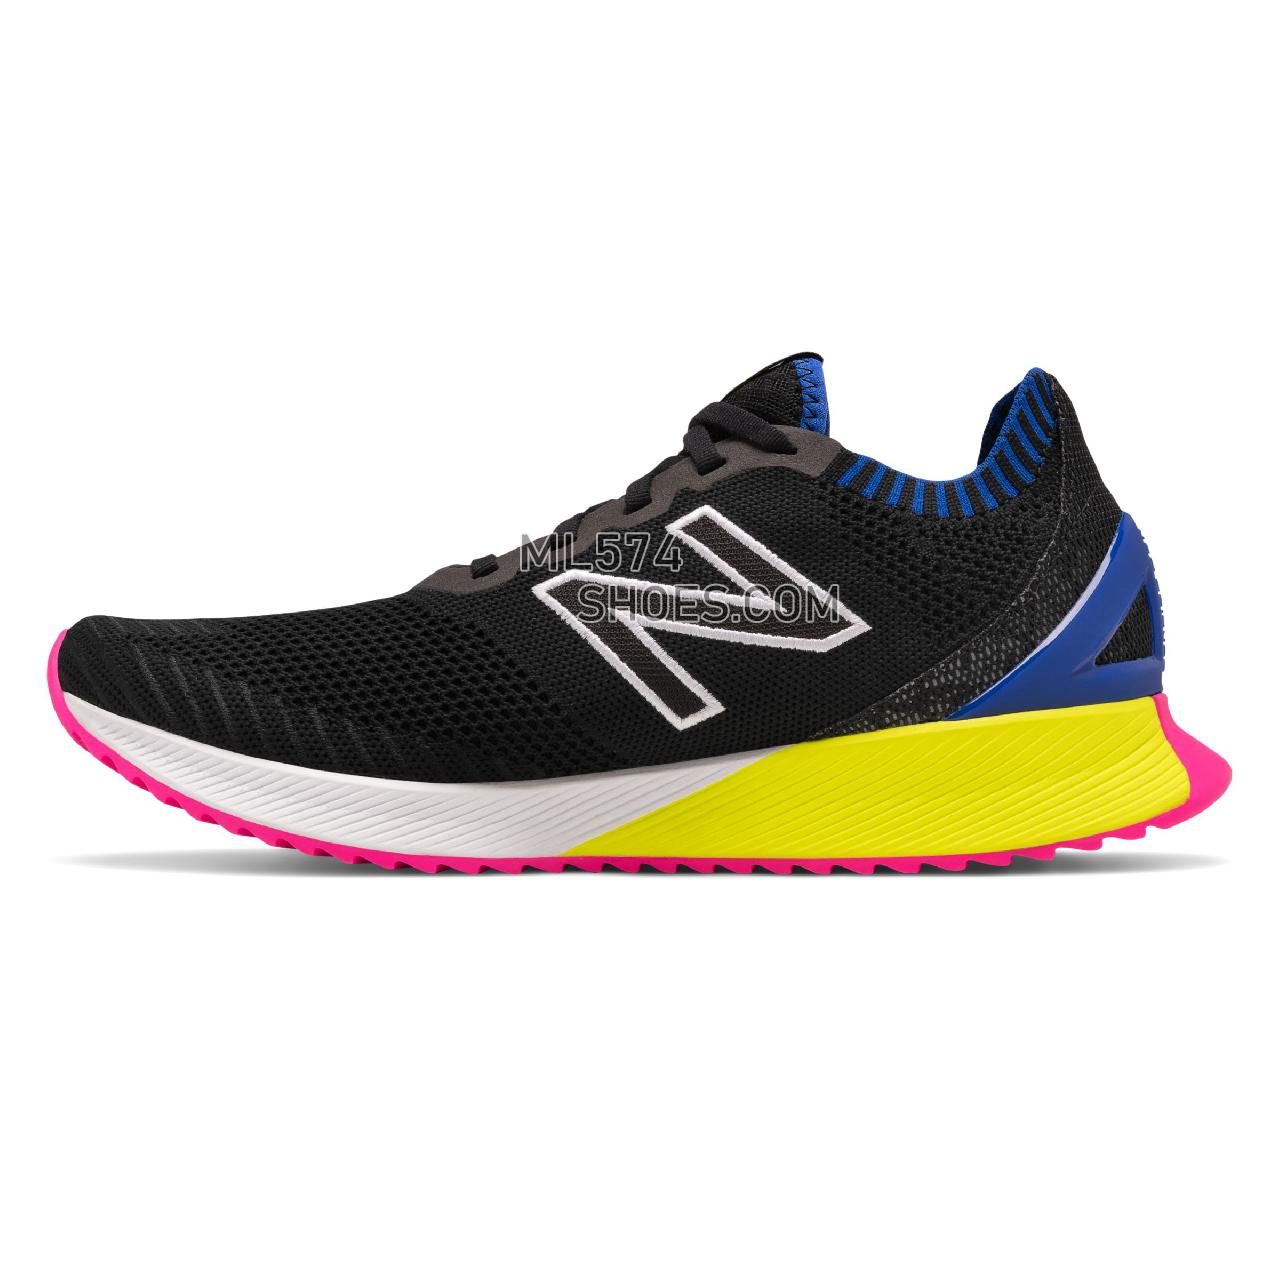 New Balance FuelCell Echo - Men's Neutral Running - Black with UV Blue and Sulphur Yellow - MFCECSB